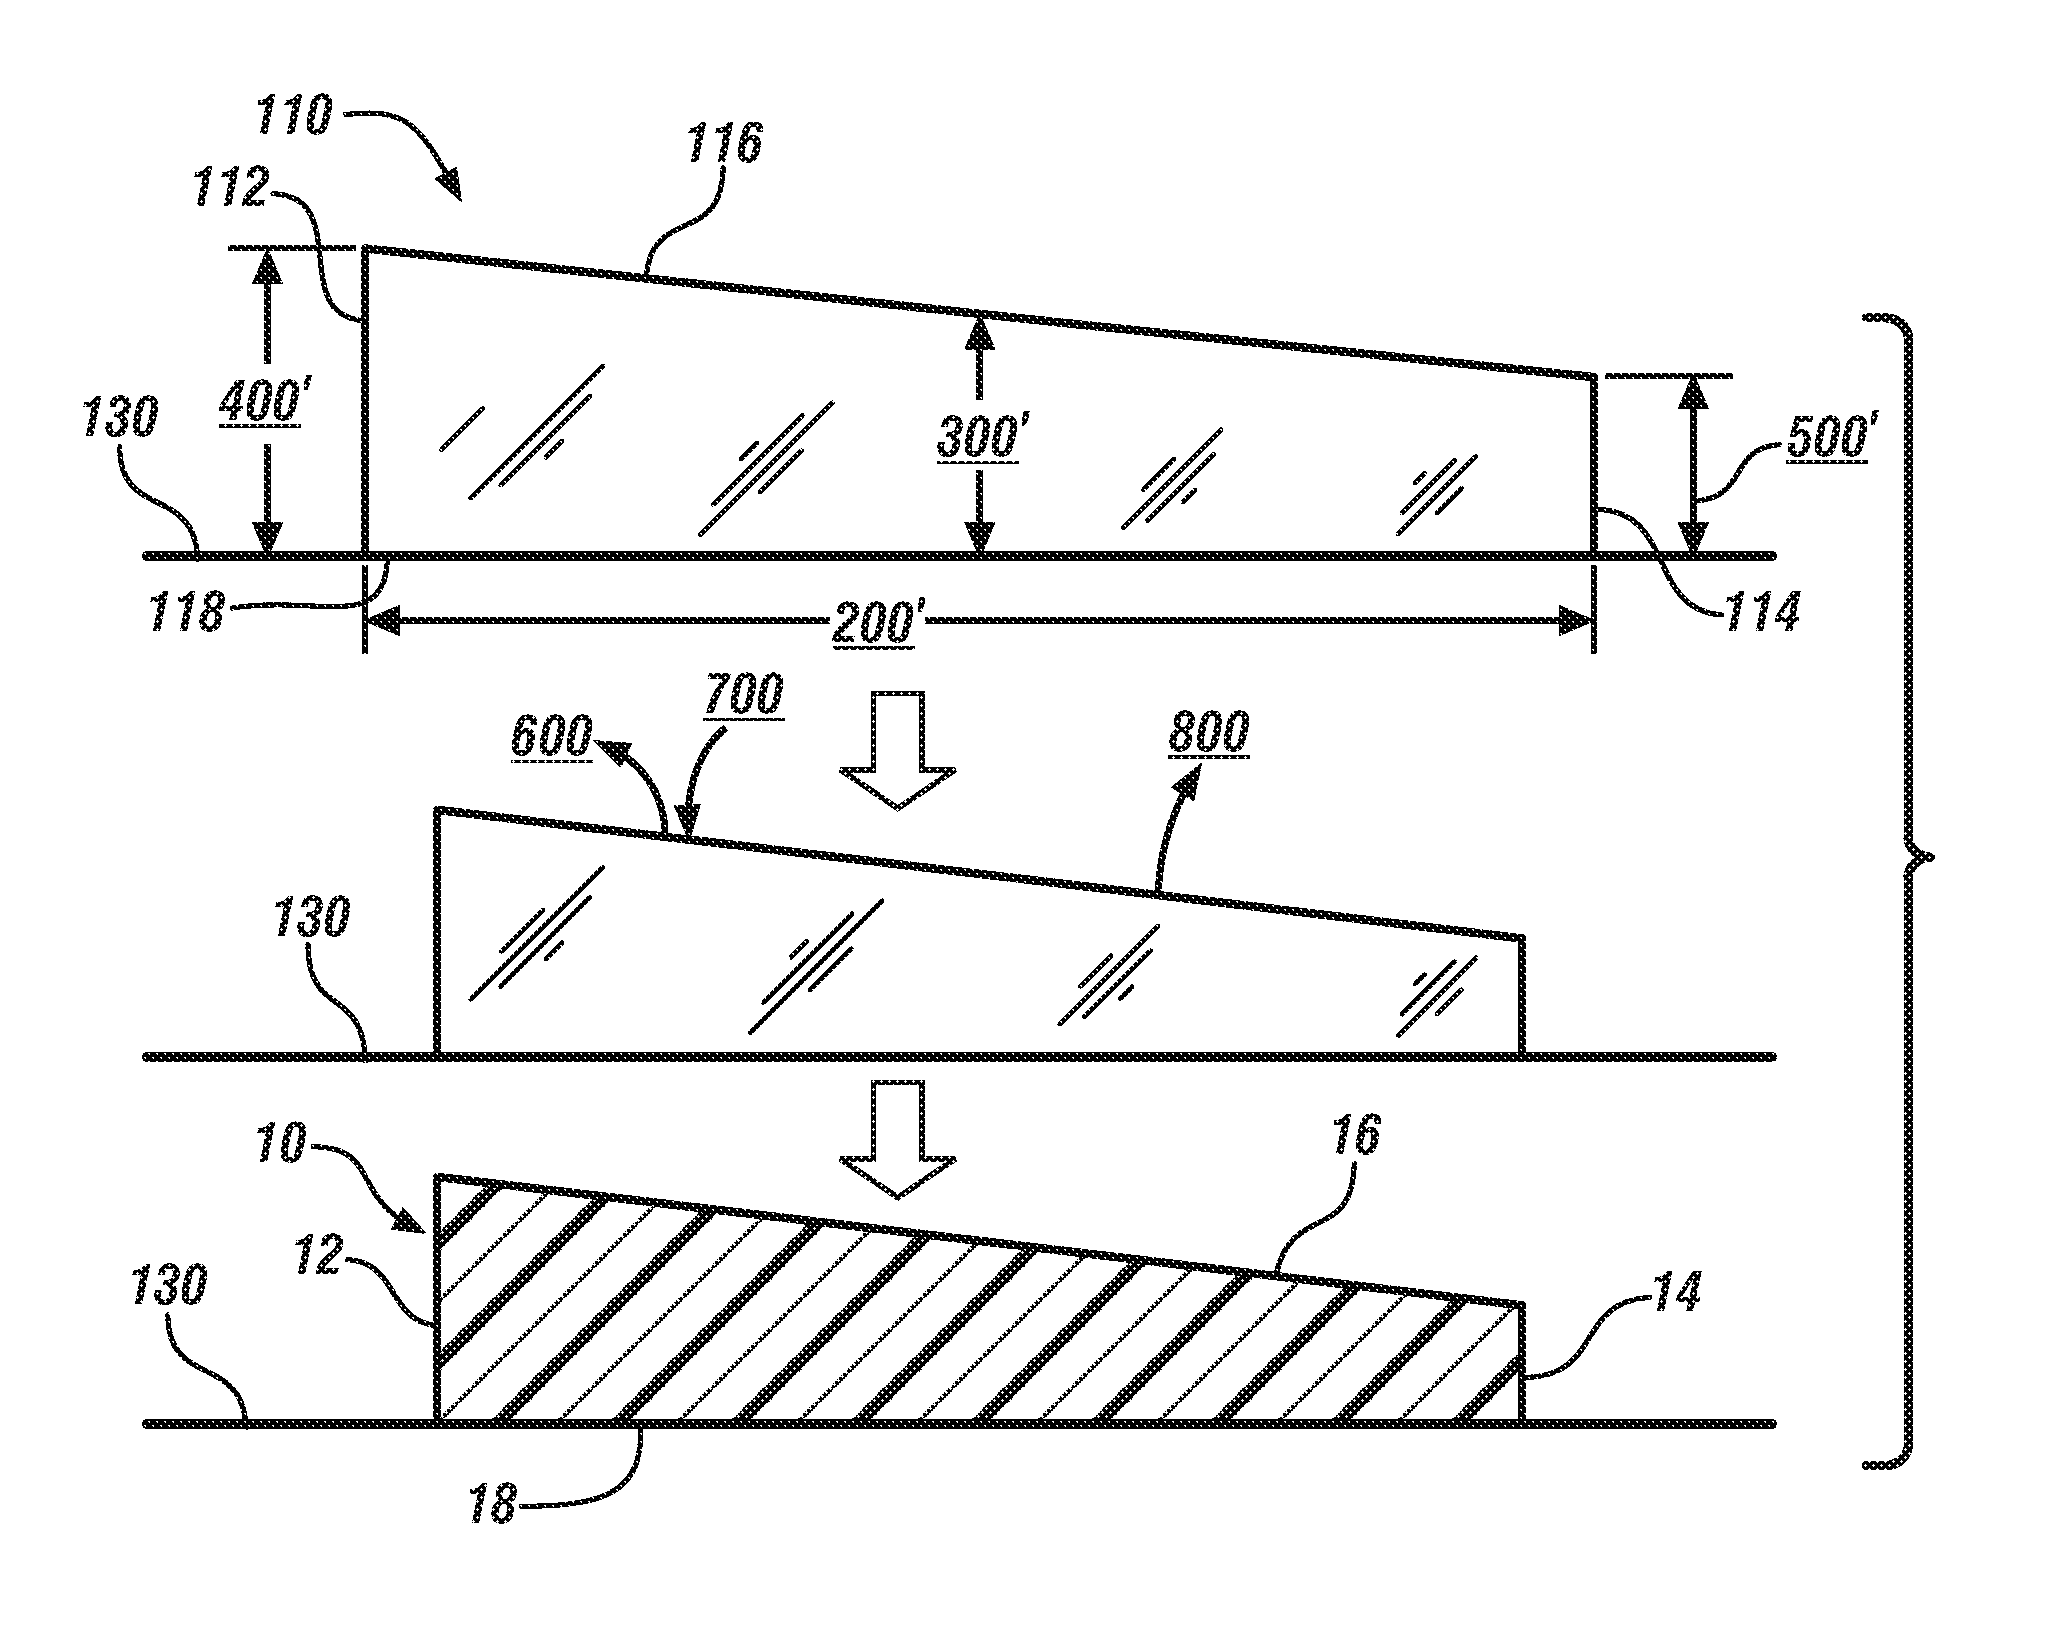 Porous polymer separator layer having a non-uniform cross sectional thickness for use in a secondary liquid electrolyte battery